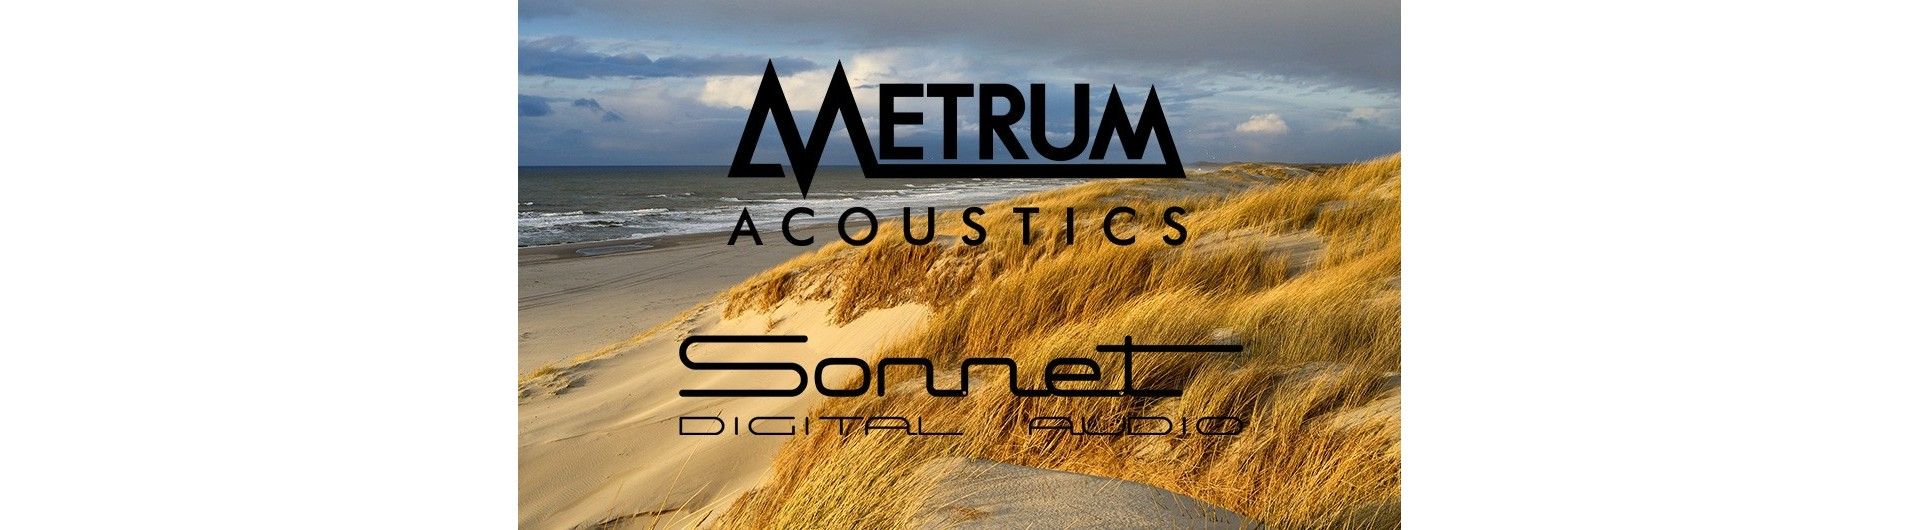 Our vision moving forward: Metrum and Sonnet are moving in together!